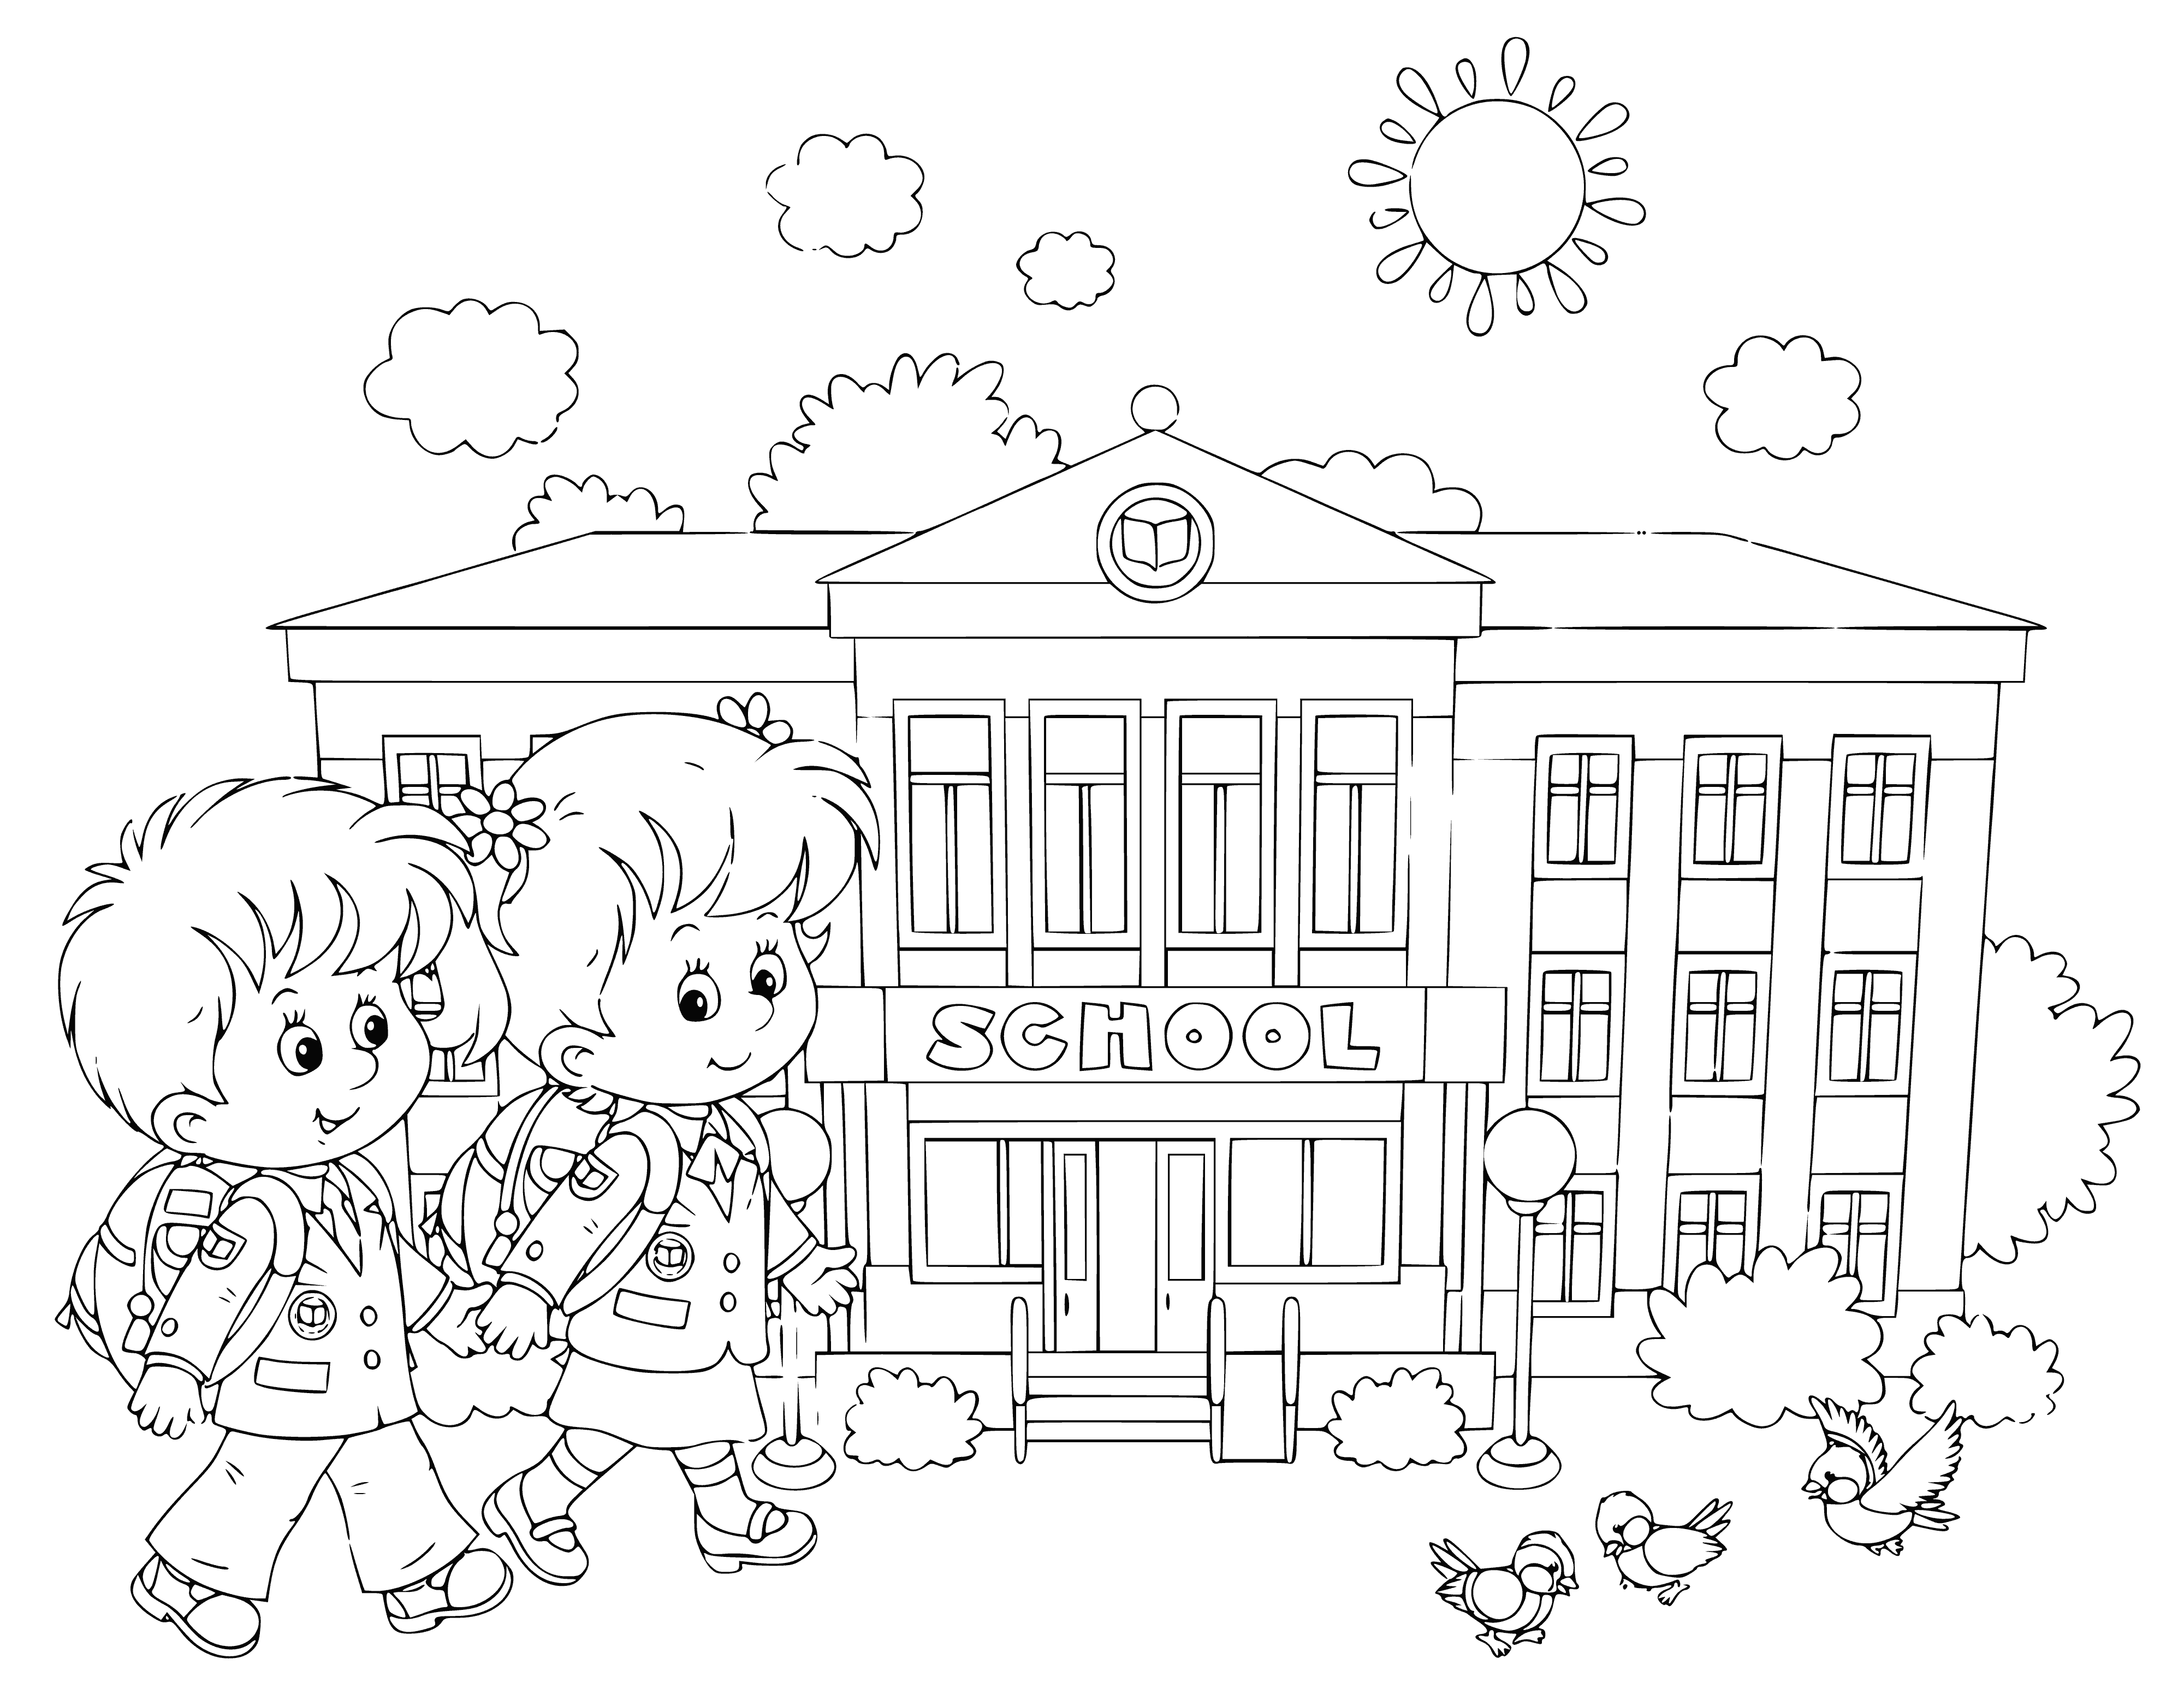 coloring page: Boy & girl walking to school together carrying backpacks & book, looking happy & excited. #school